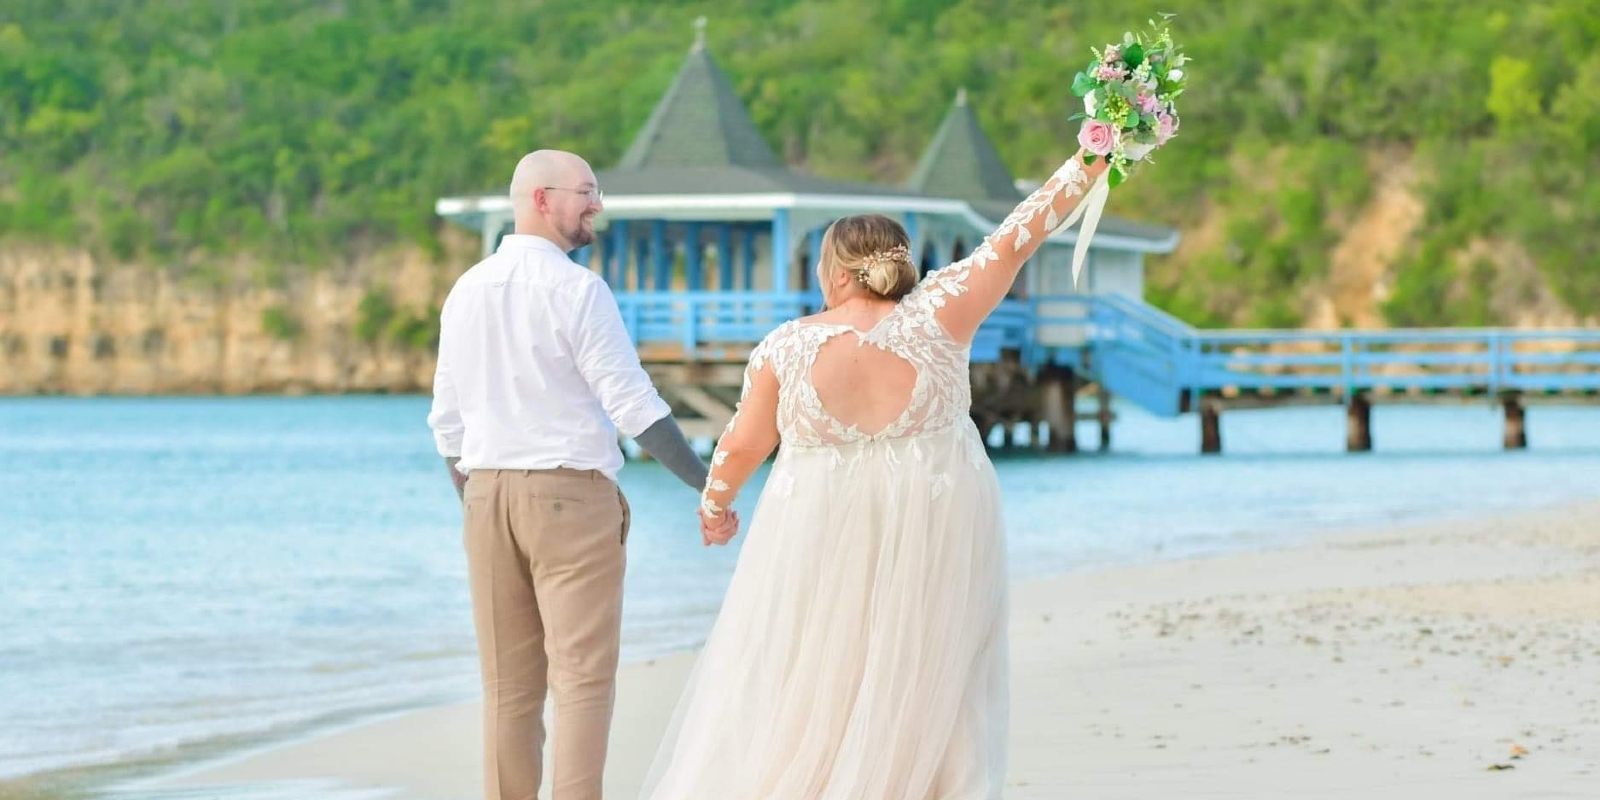 Jo and her new husband Jon are walking on the beach as Jo raises the bouquet into the air